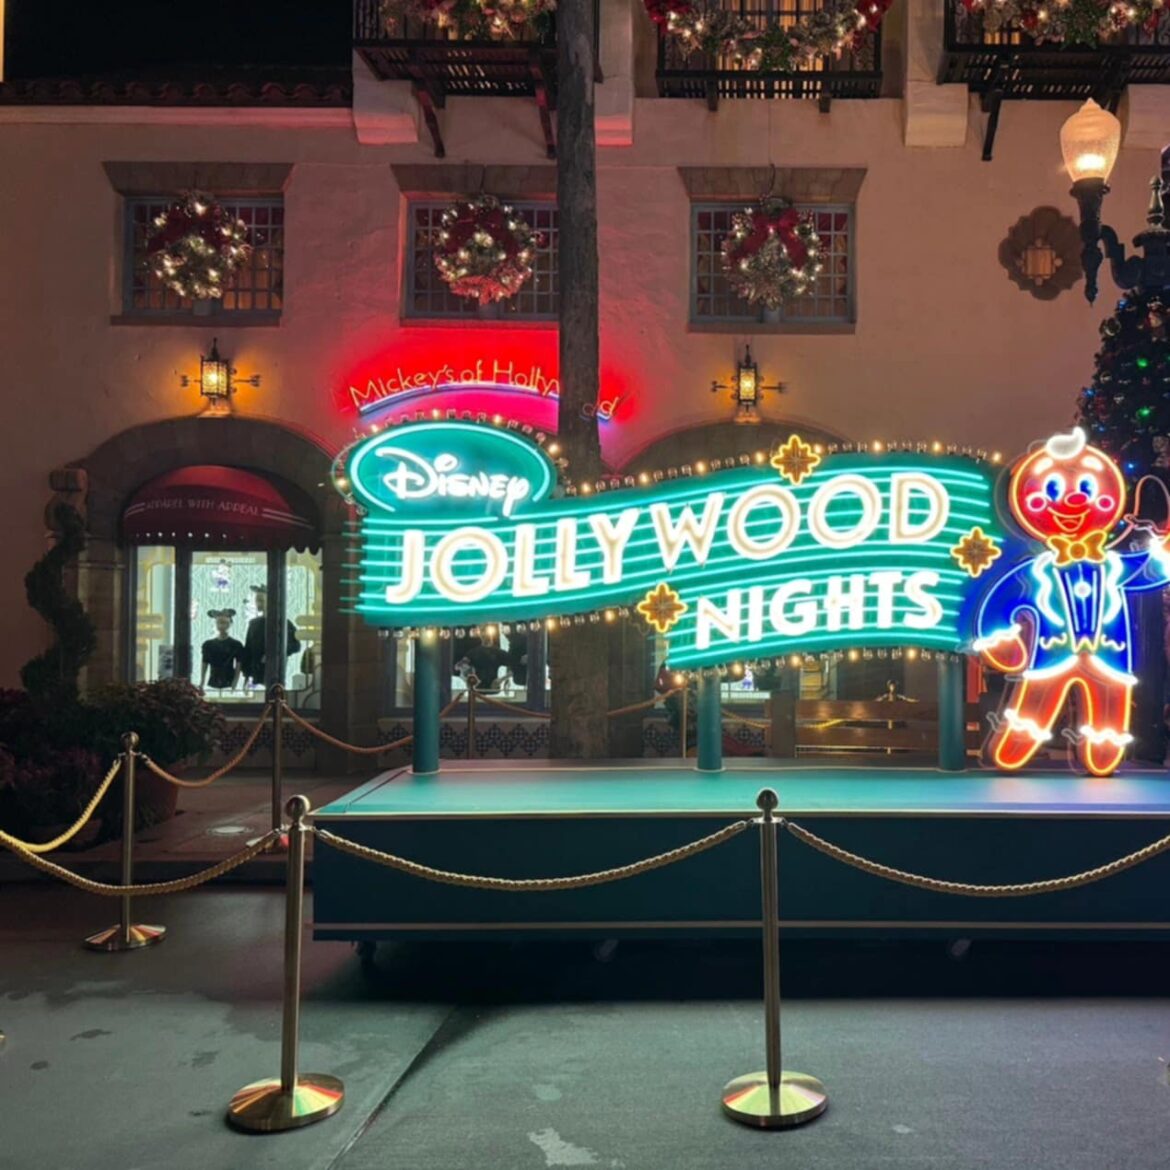 New Skating Show Coming to Jollywood Nights in Disney’s Hollywood Studios